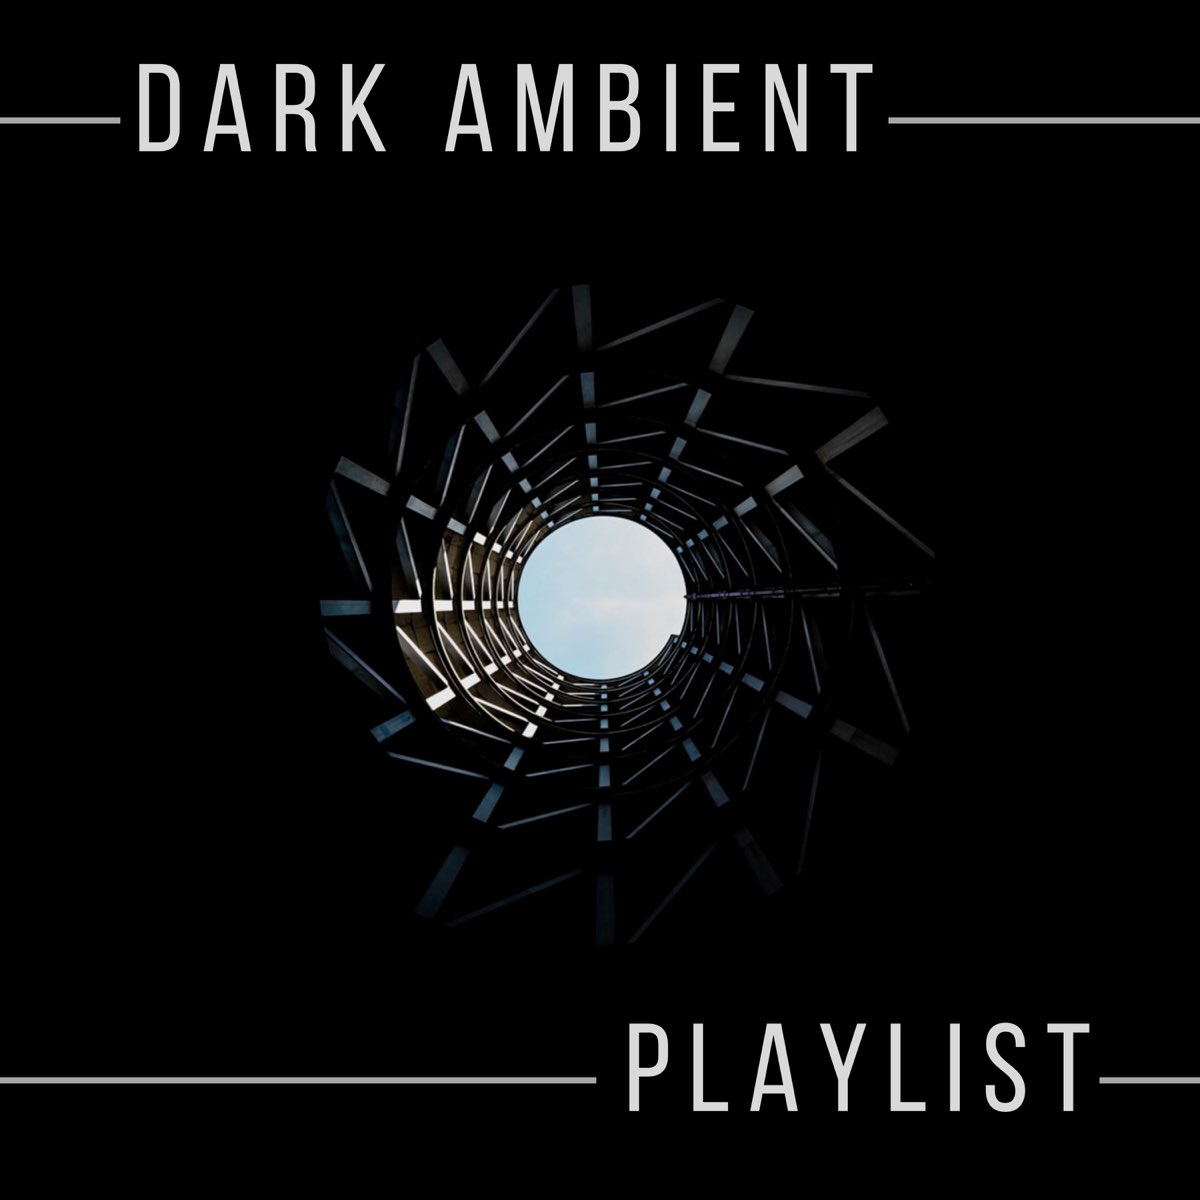 Dark Ambient Playlist - Relaxing Drone Music, Electronic Synth Music for  Study, Concentration, Focus by Theodor Time on Apple Music